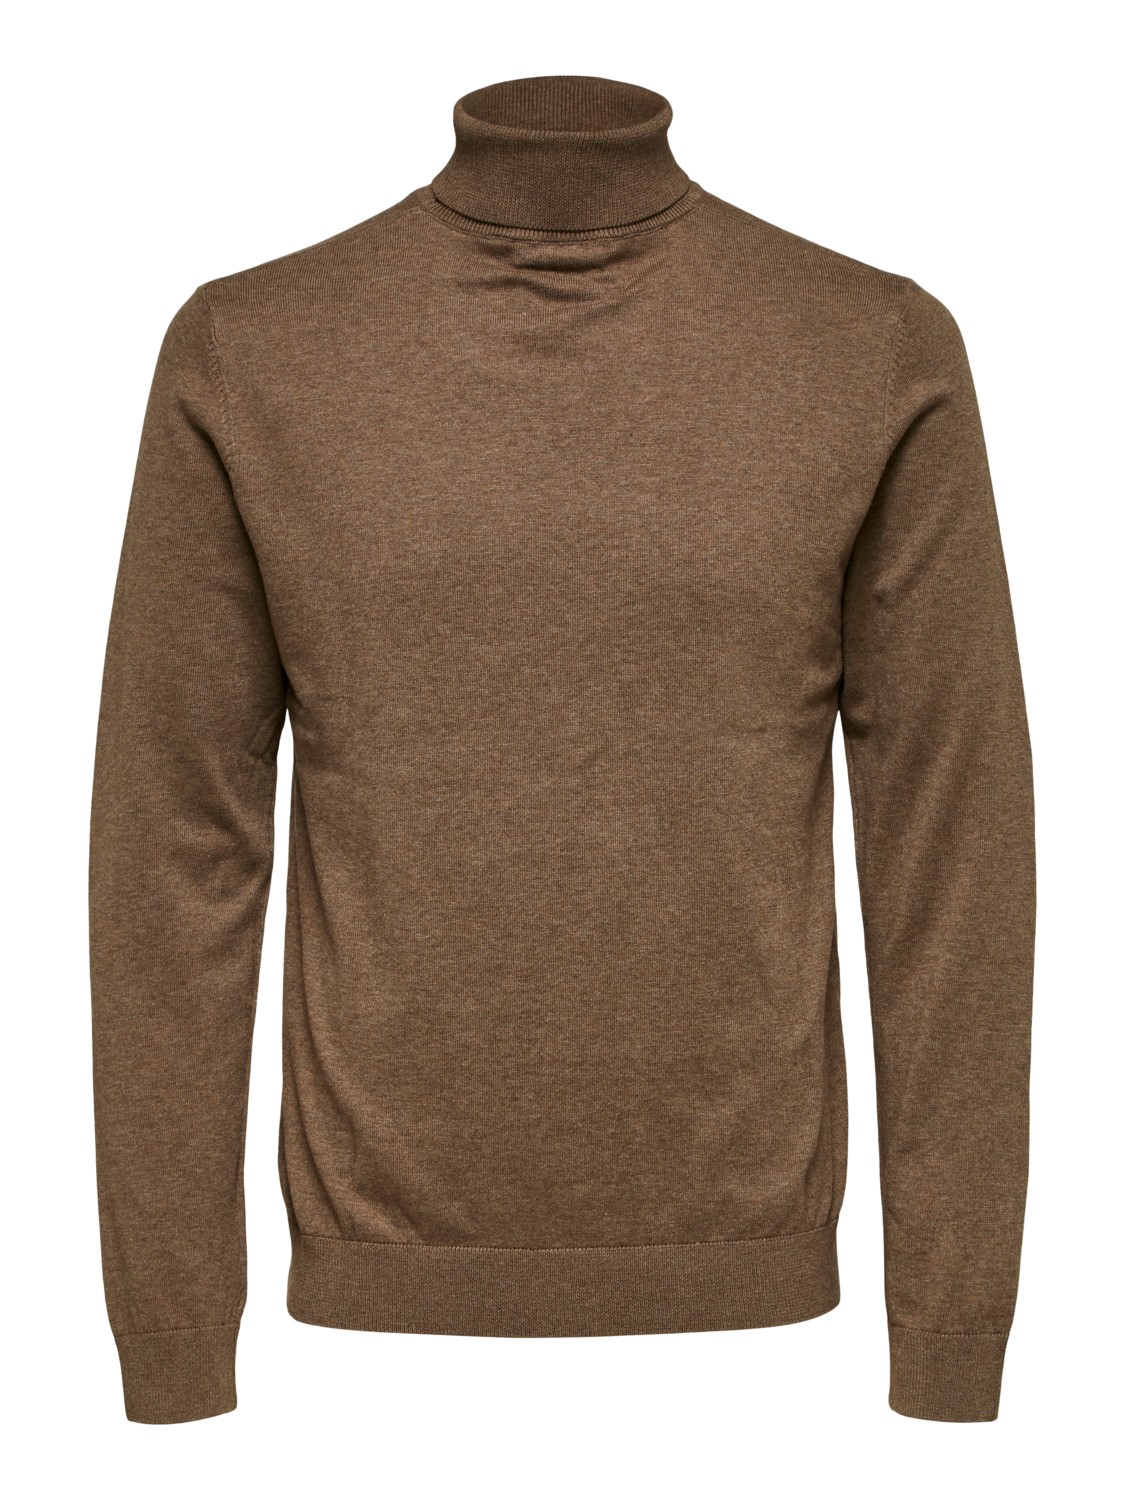 Пуловер SELECTED HOMME SLHBERG ROLL NECK, коричневый пуловер selected homme slhvince коричневый